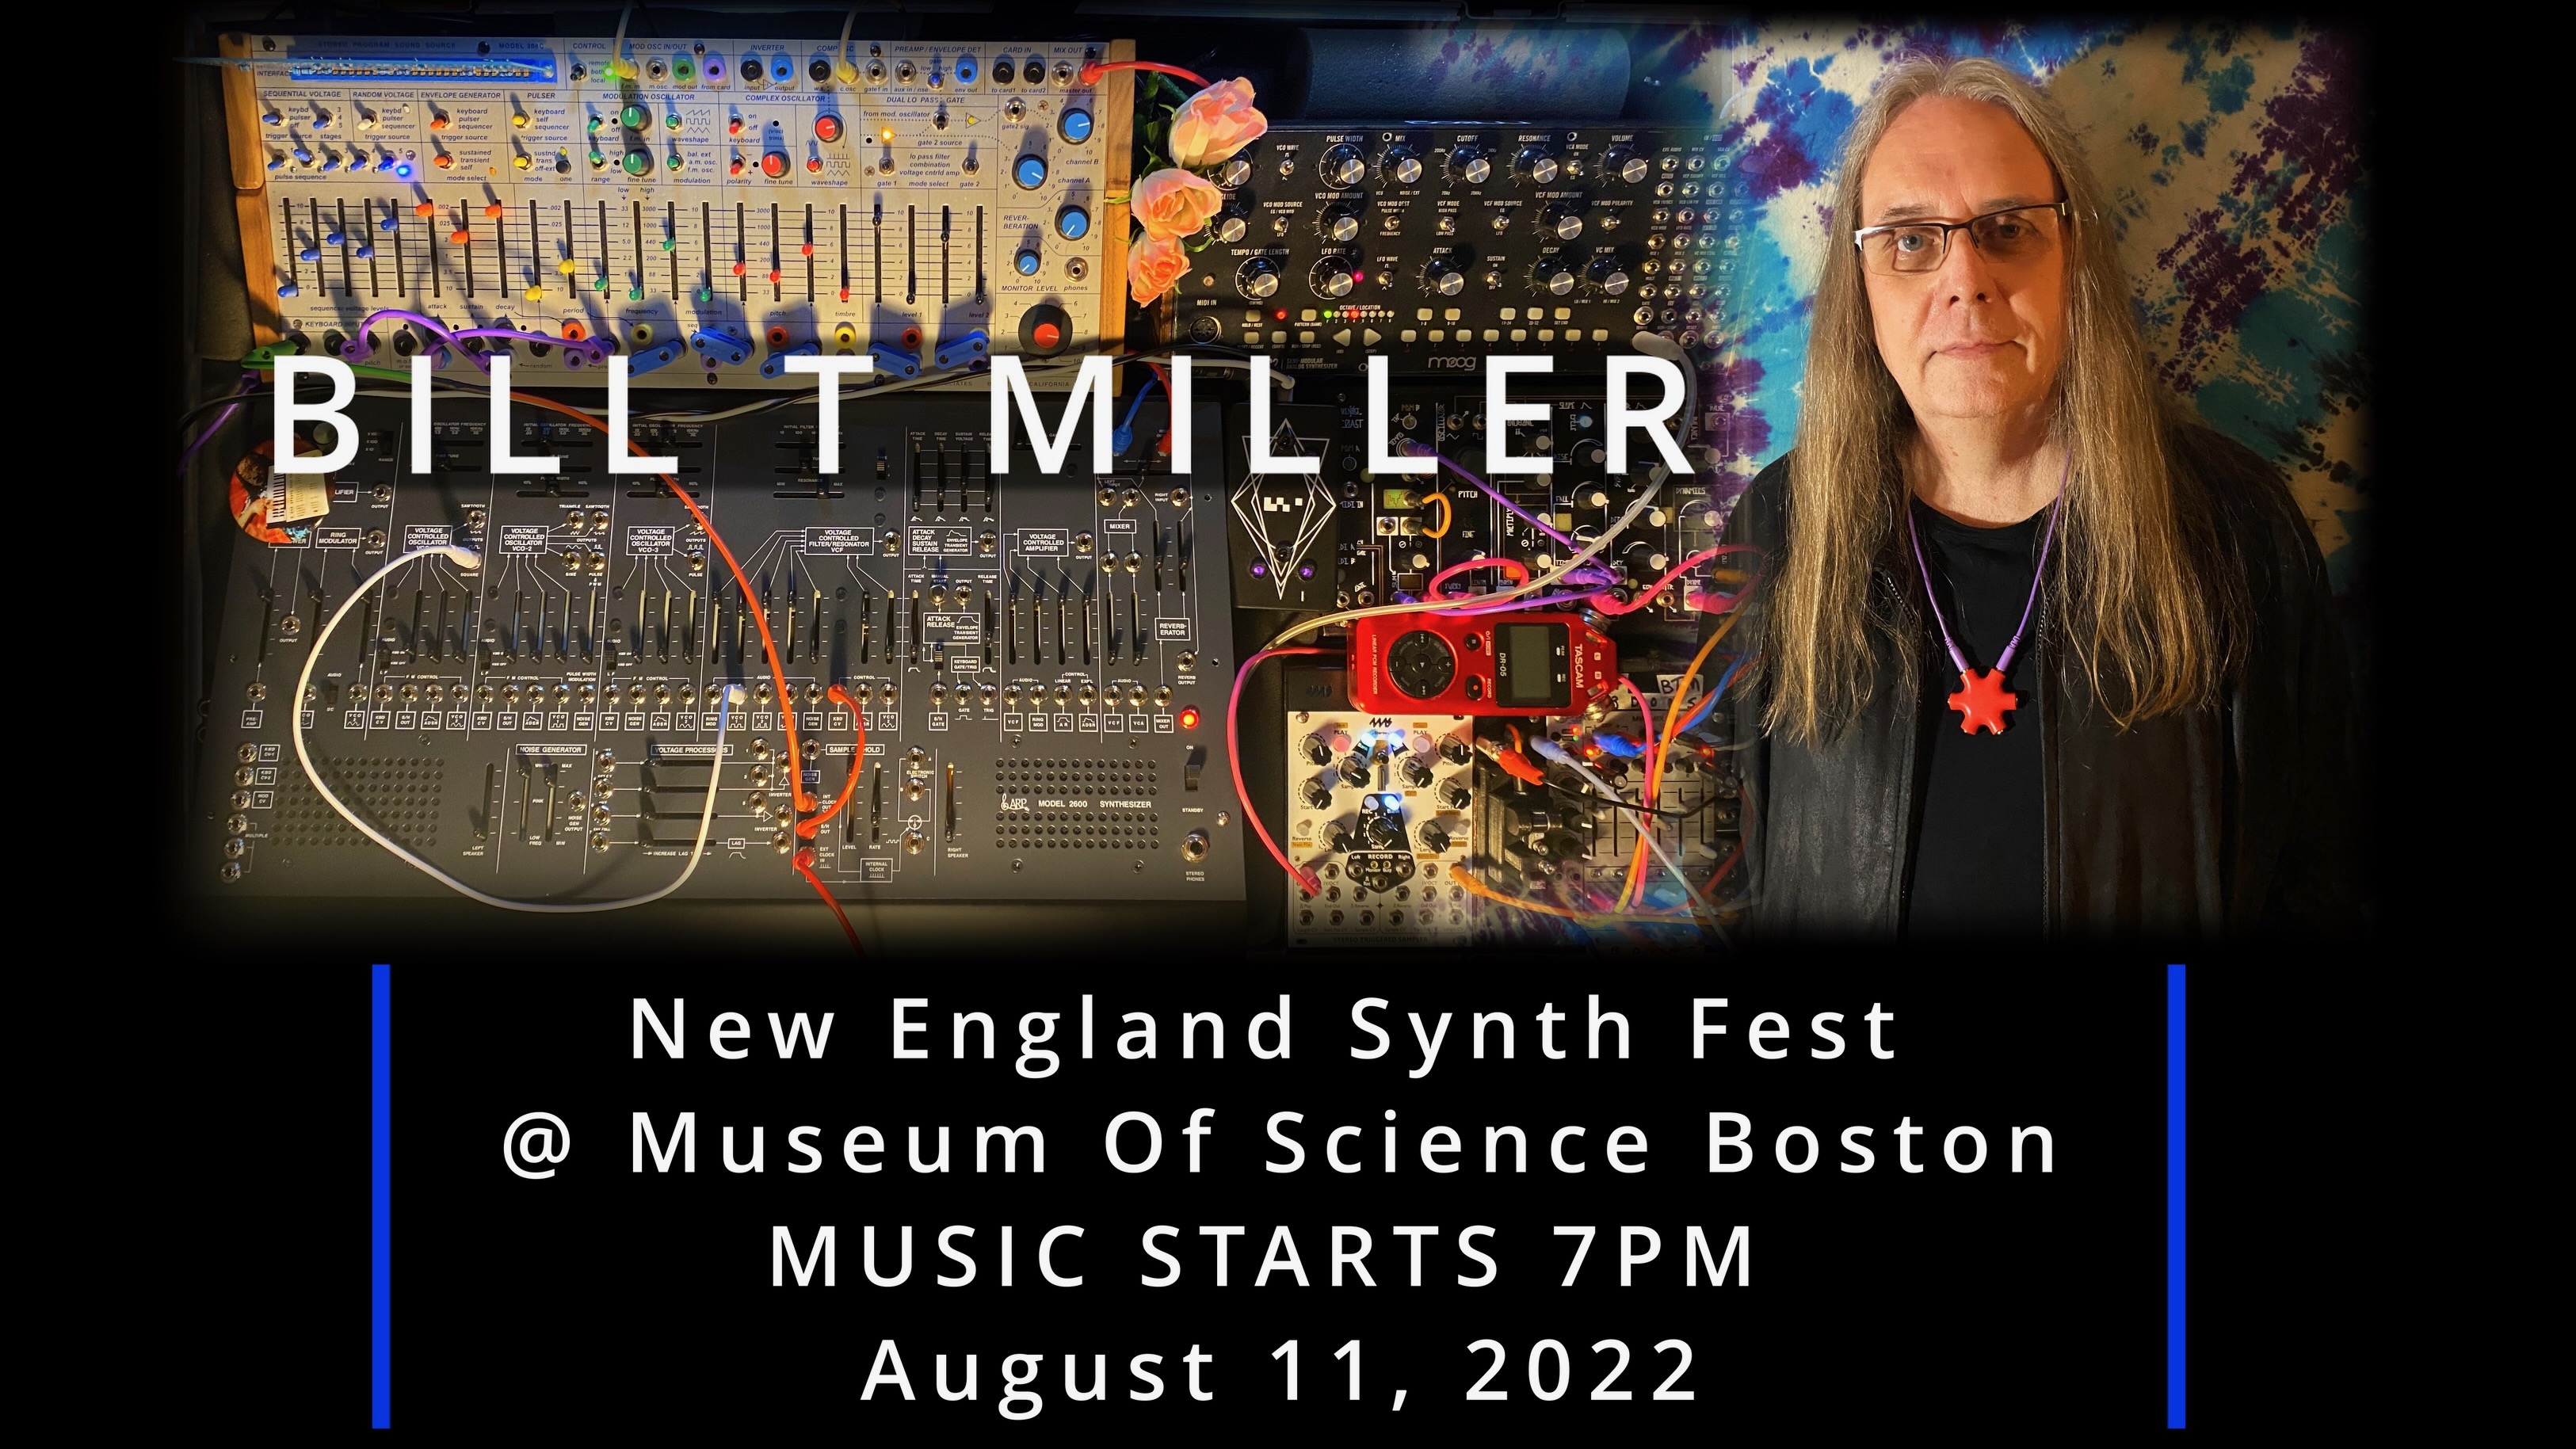 Bill T Miller at New England Synth Fest - 7pm - August 11, 2022 @ Musuem Of Science Boston